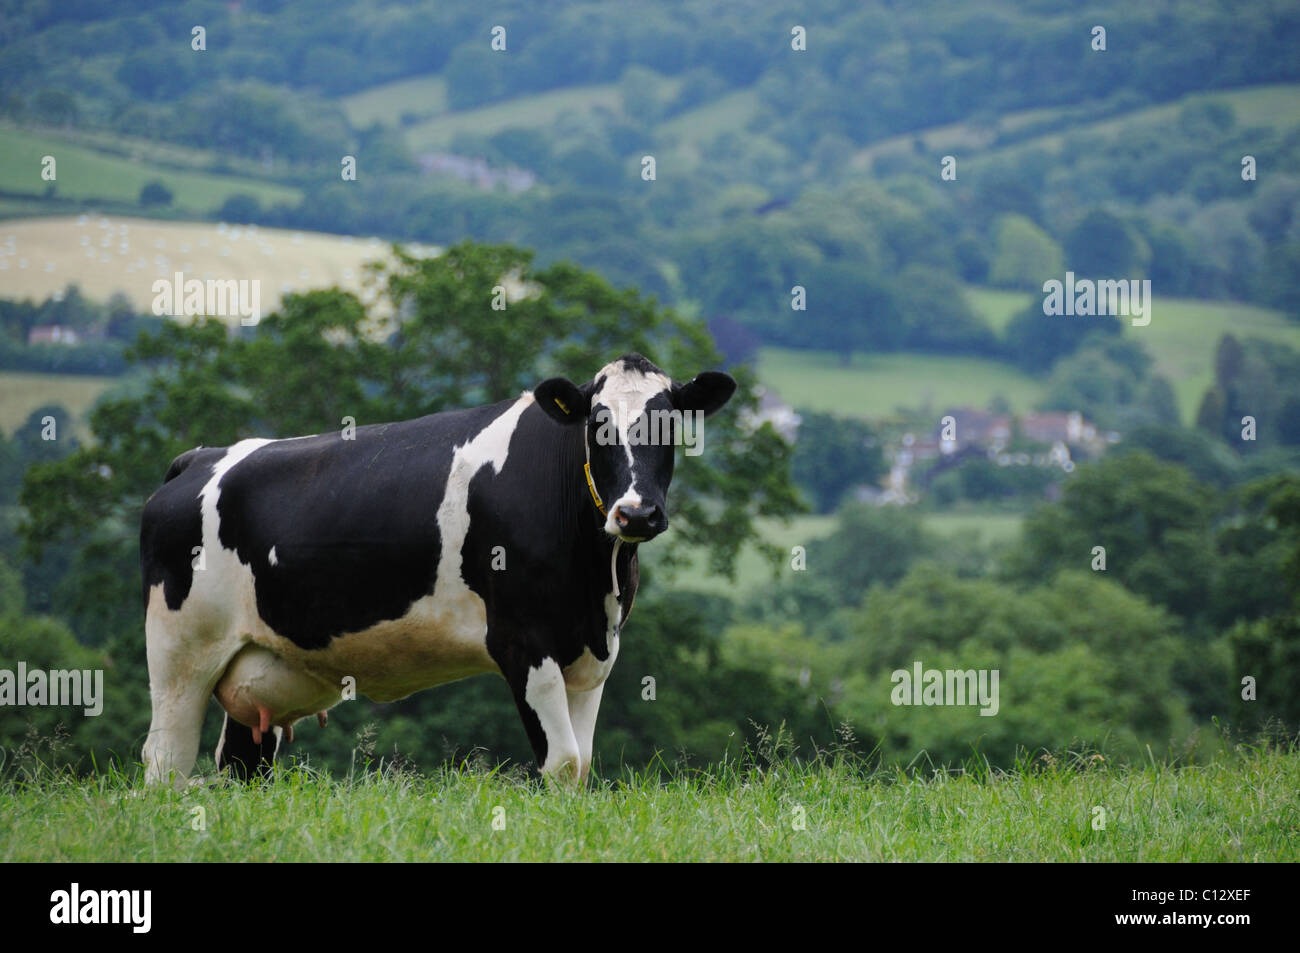 Dairy cow in a field with a farm in the background Stock Photo